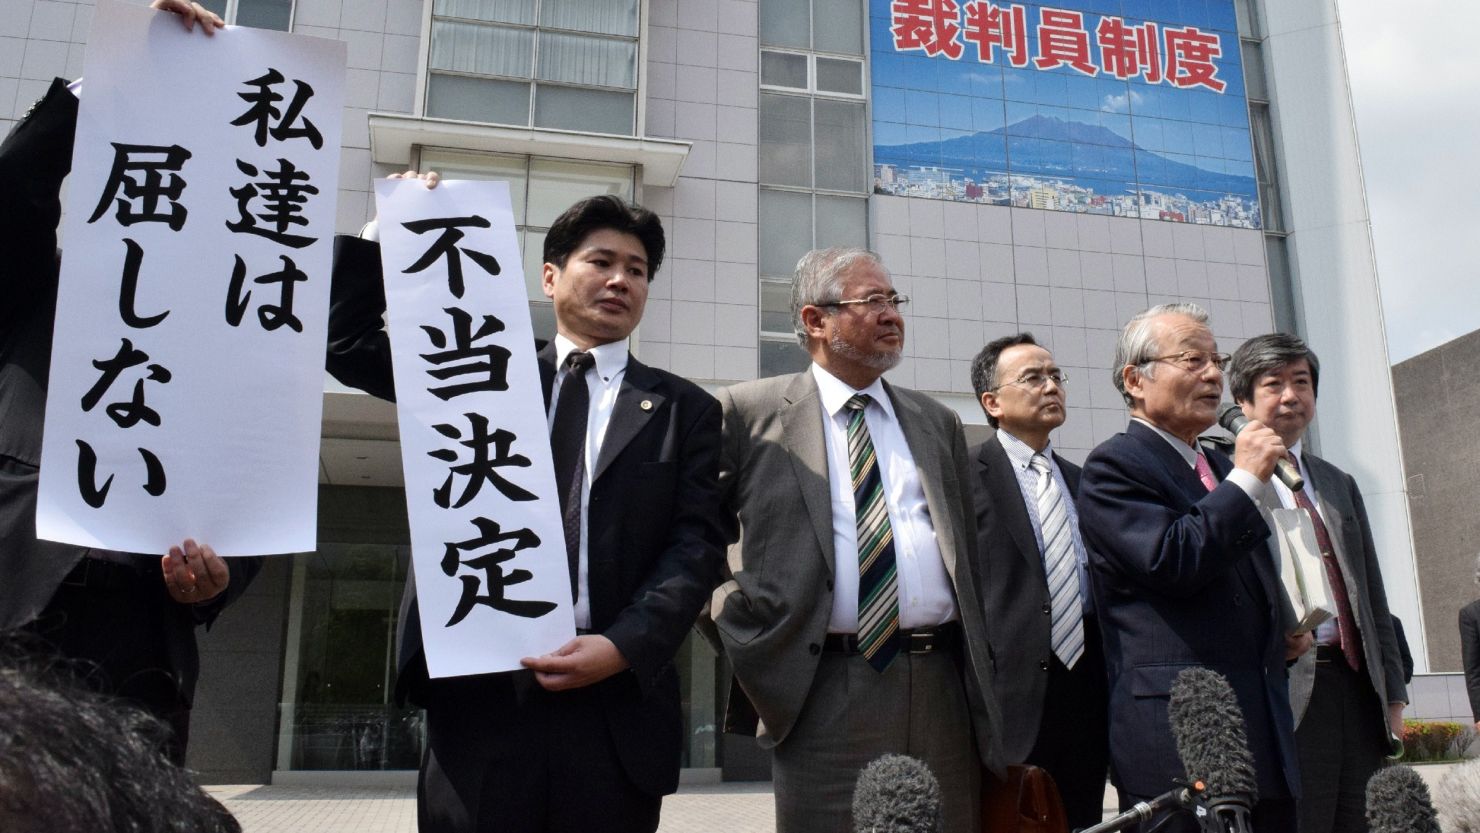 Japanese lawyers show banners with 'unfair ruling' in front of the Kagoshima district court in Kagoshima, Japan's southern island of Kyushu on April 22, 2015. 